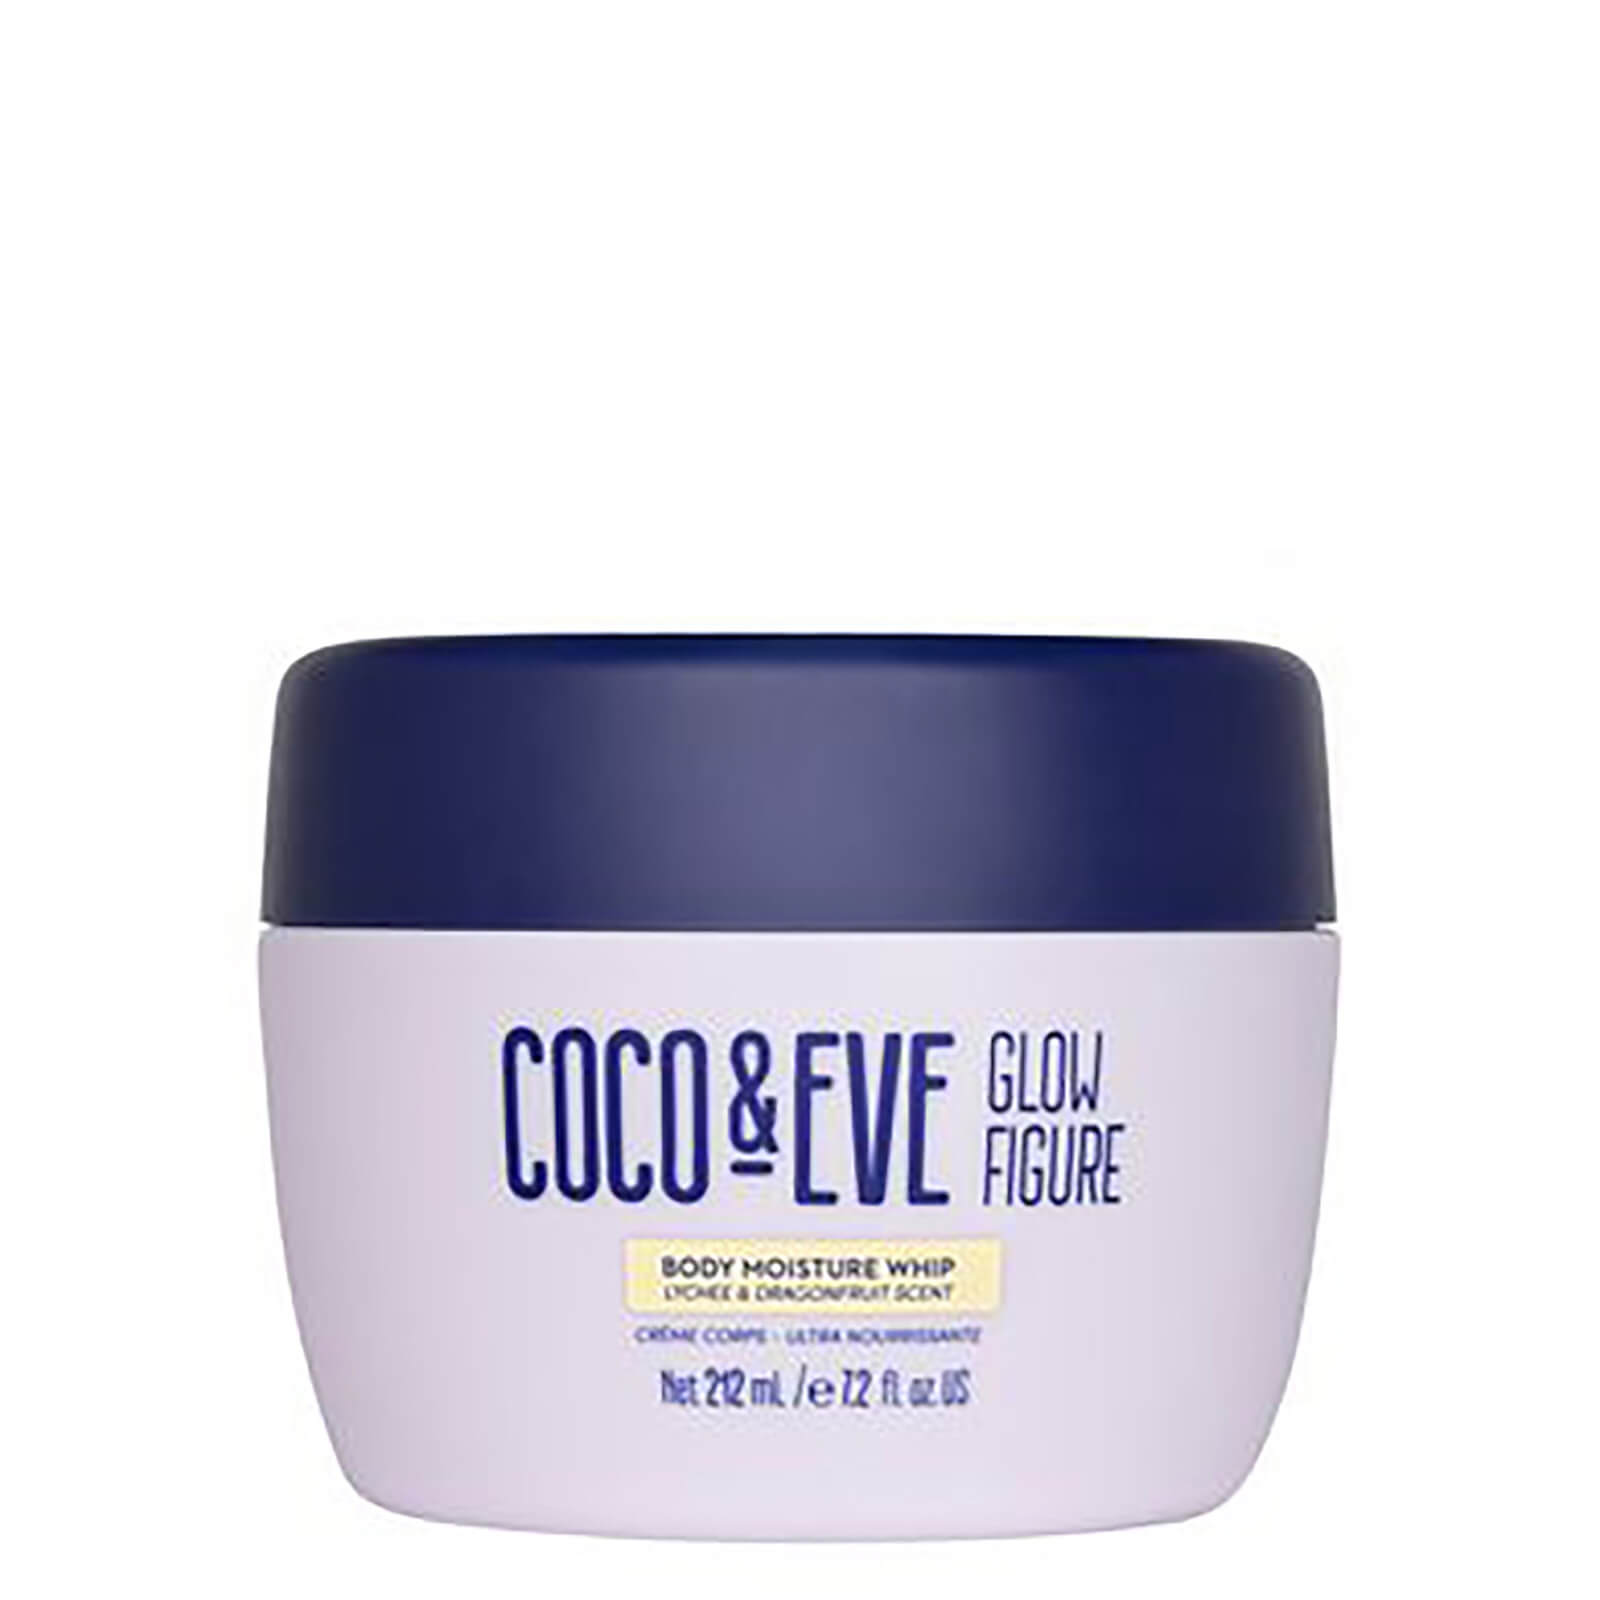 COCO & EVE GLOW FIGURE WHIPPED BODY CREAM (VARIOUS SIZES) - 212ML